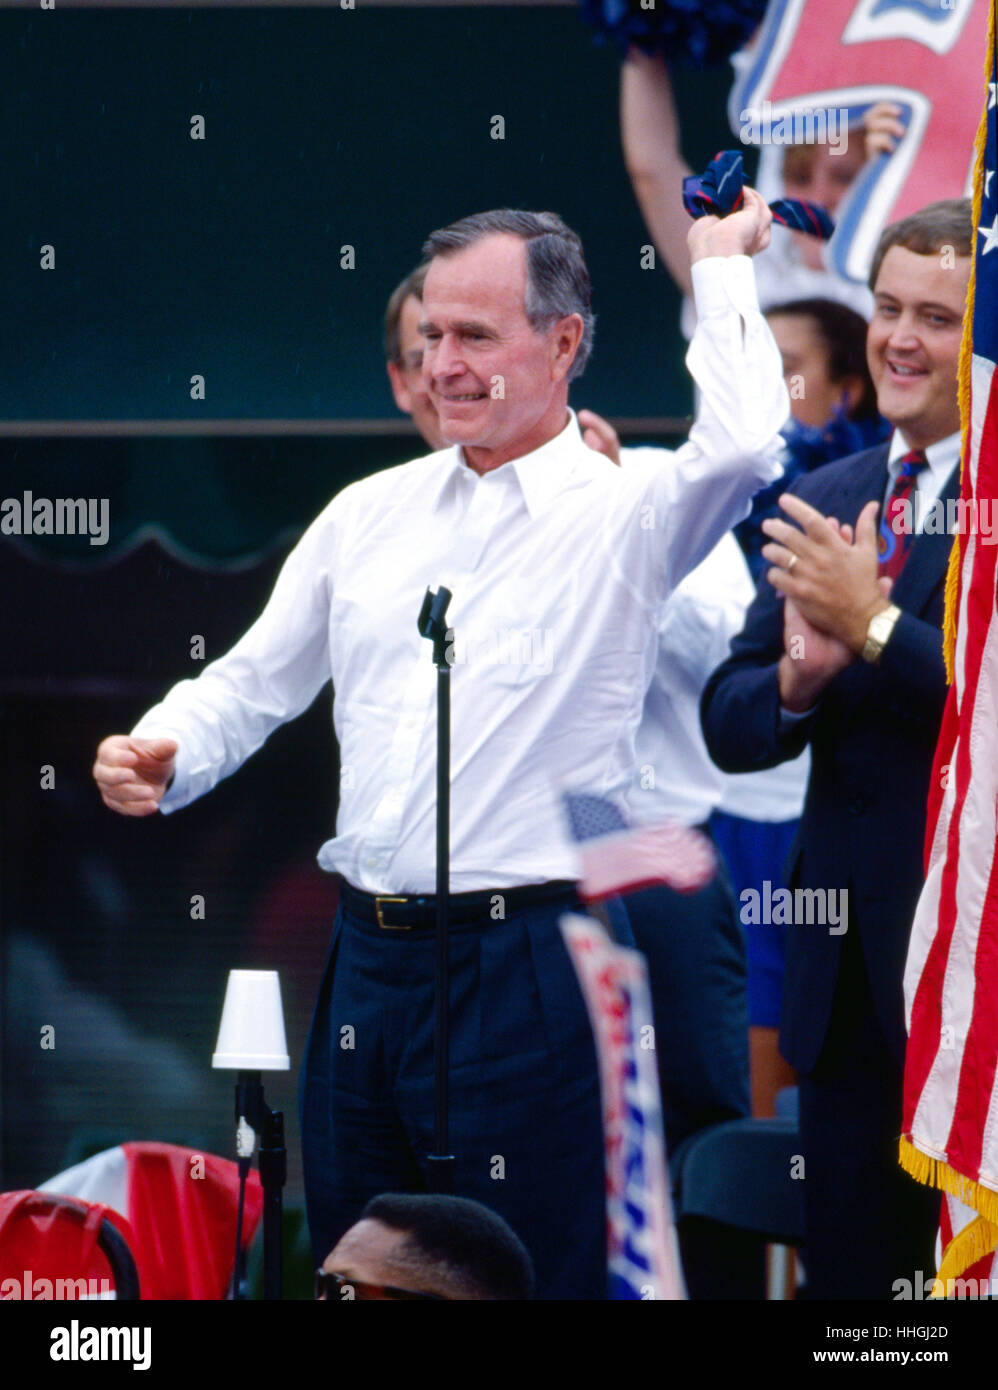 A rain-soaked President George H.W. Bush campaigns for a second four year term as President of the United States in Woodstock, Georgia.  Bush was unsuccessful in his bid, losing to Bill Clinton. Stock Photo